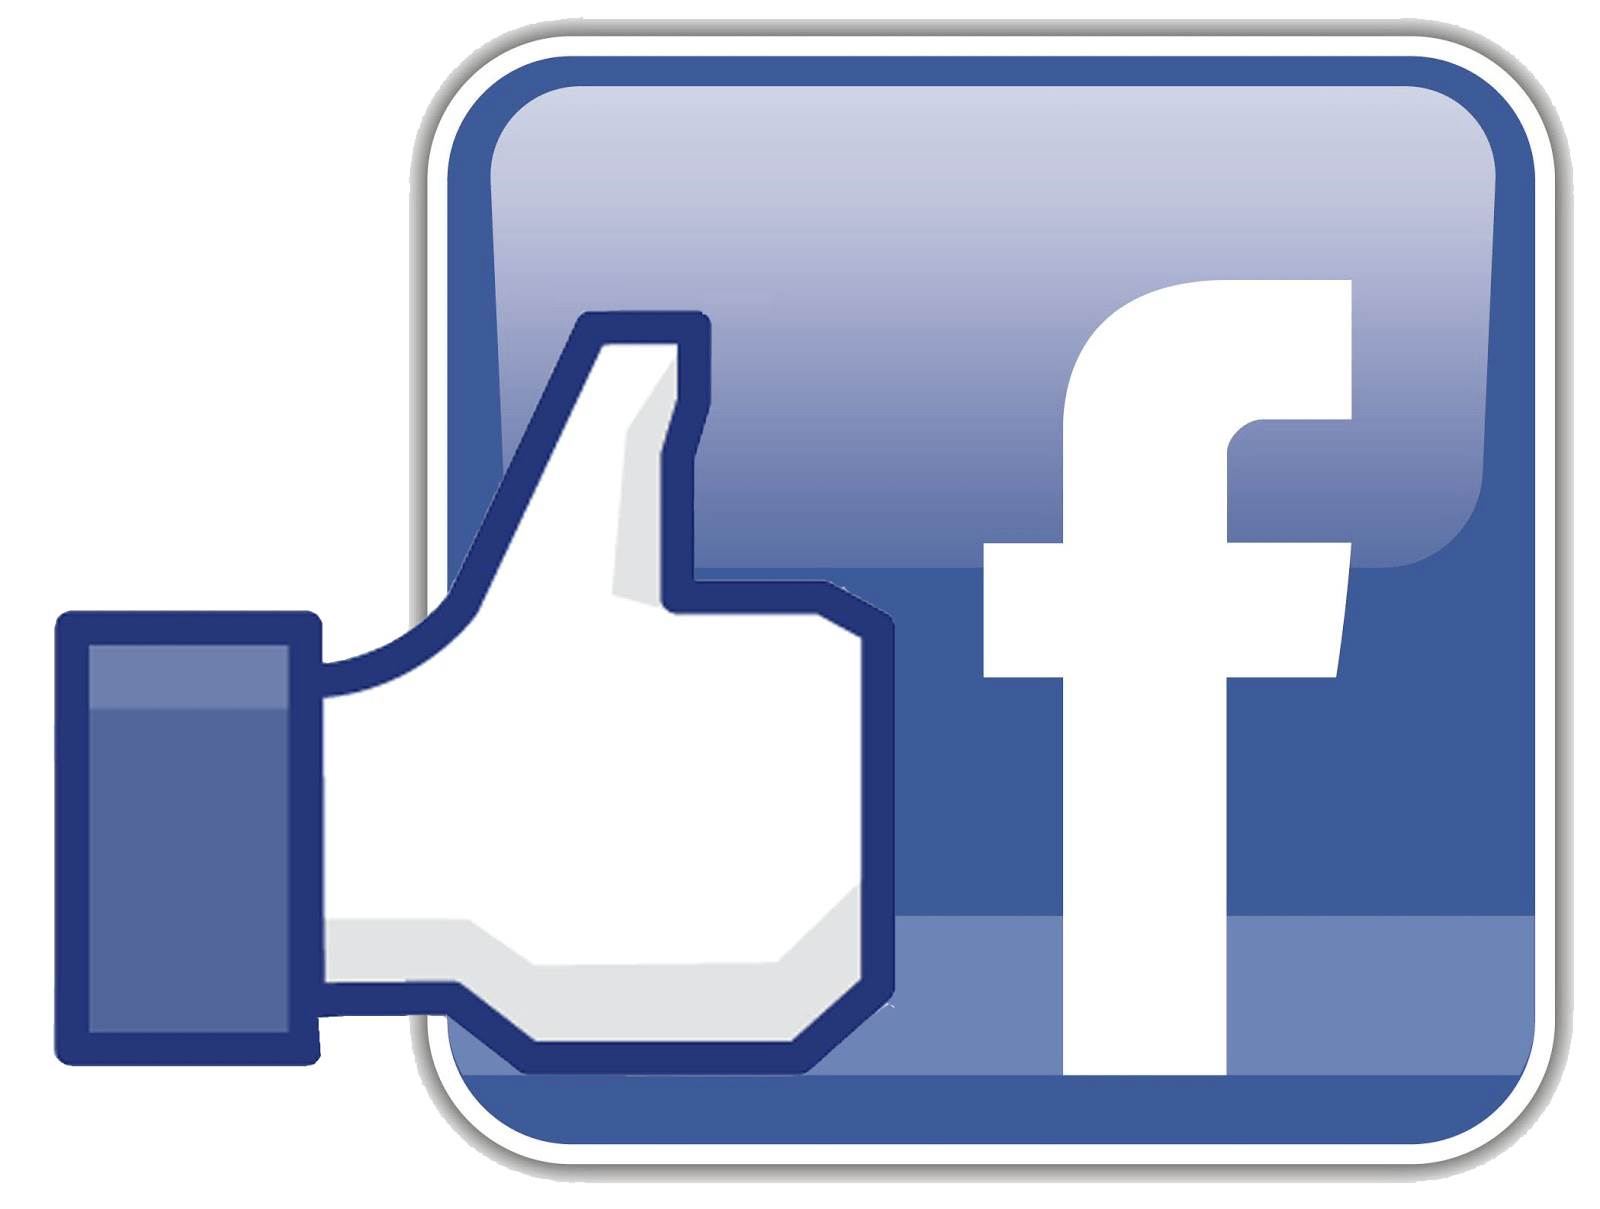 Facebook Icon Eps PNG Transparent Facebook Icon Eps.PNG Images 